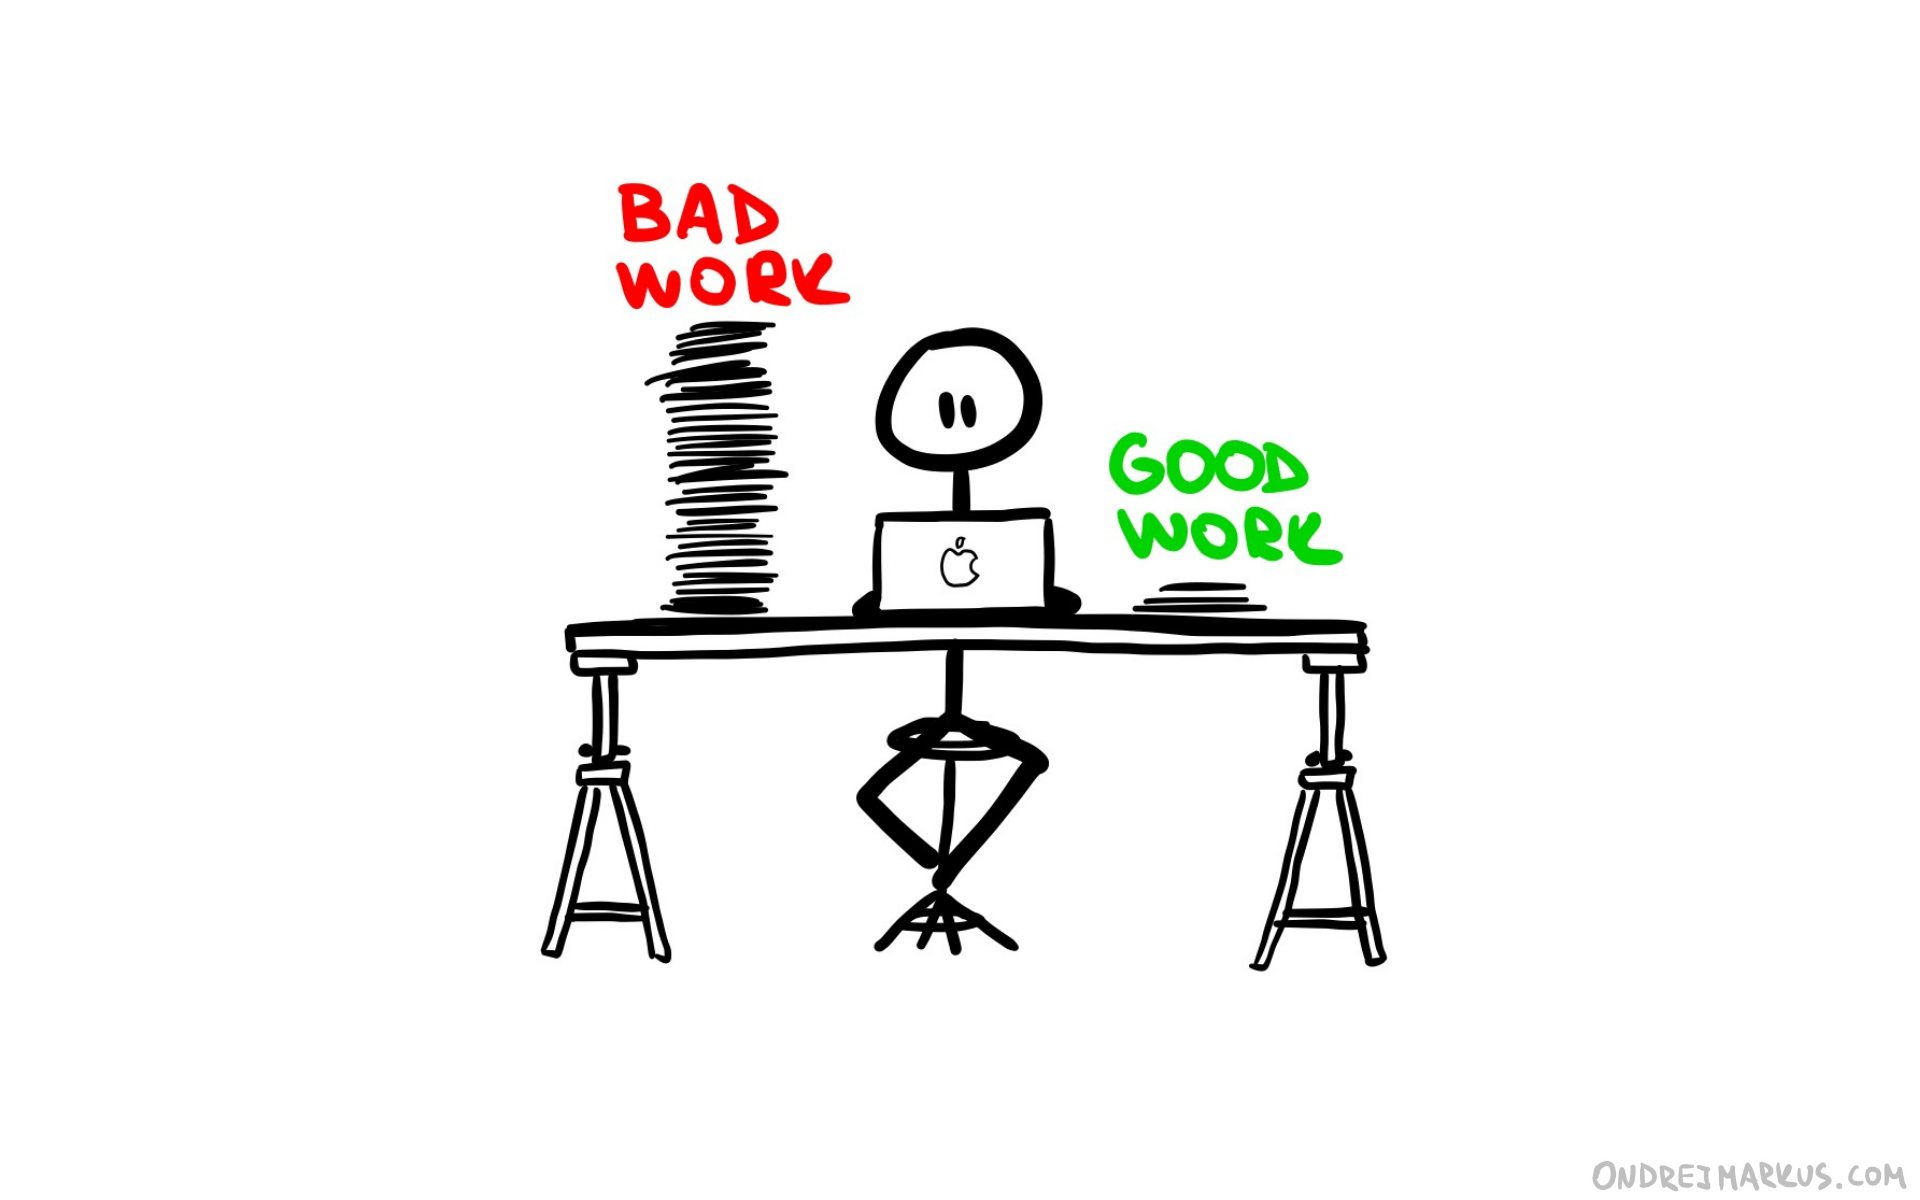 2020: My ballad for bad work